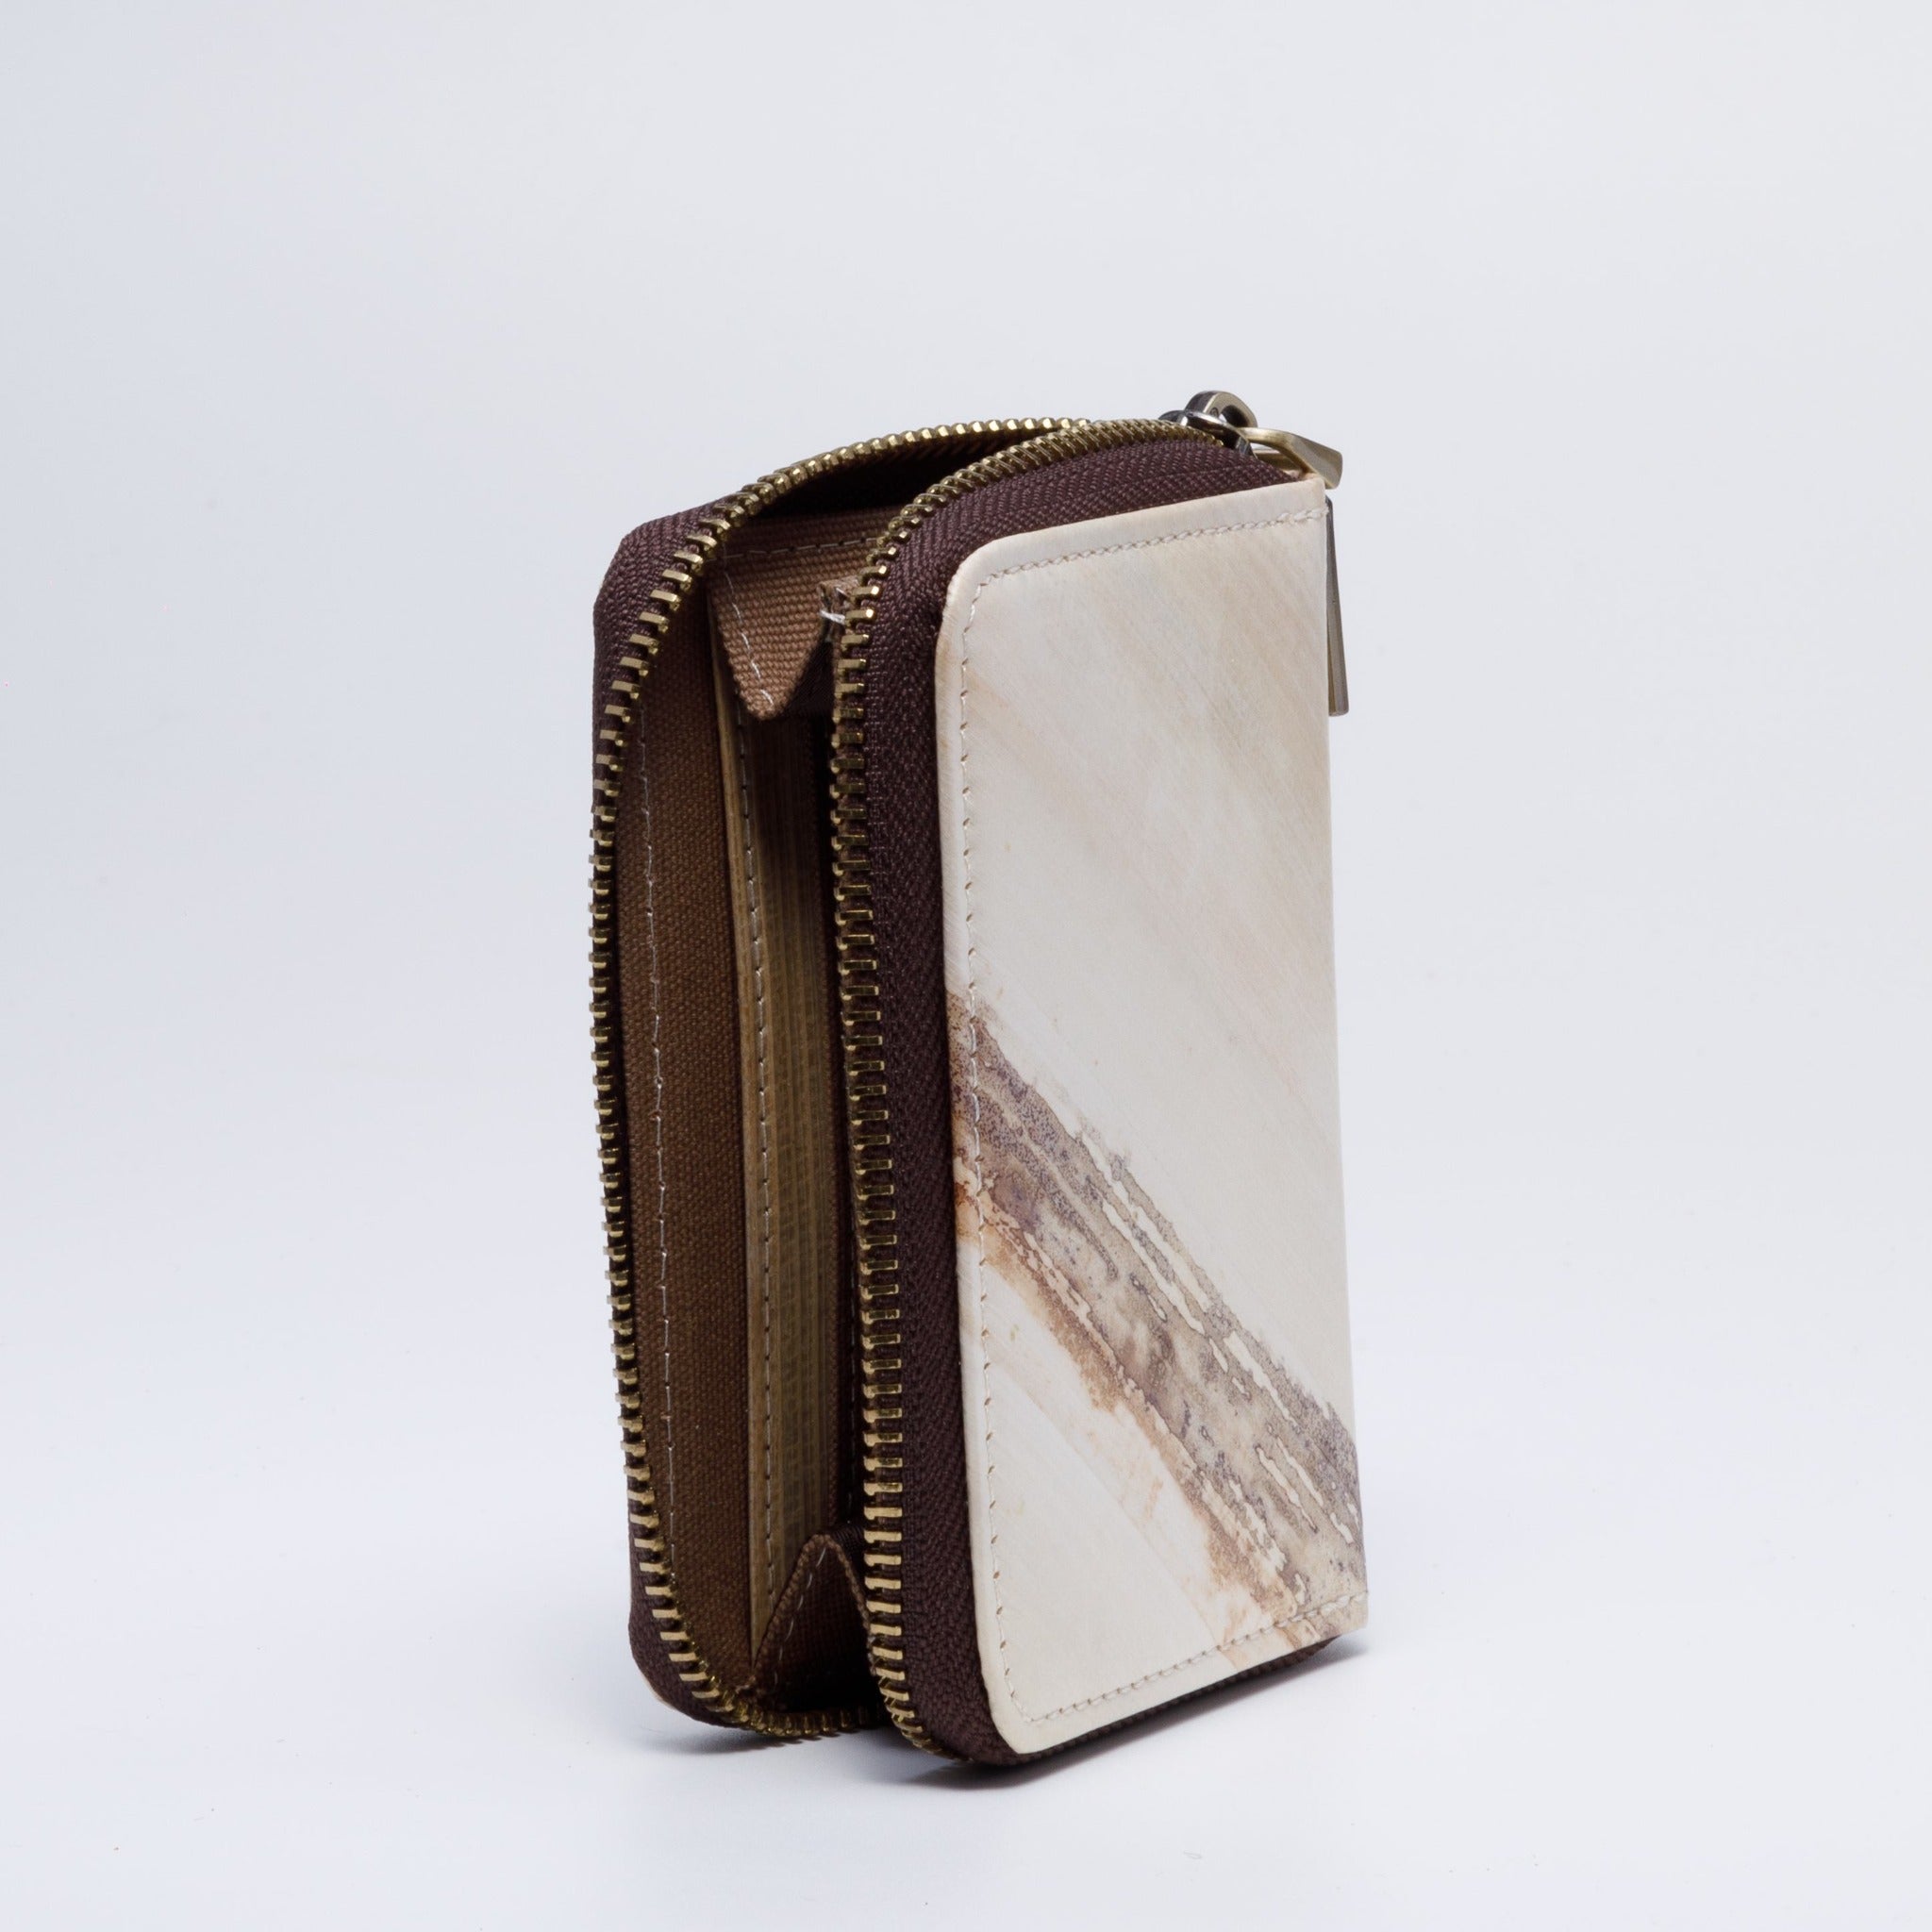 Handicraft sustainable and natural wallet from Asia. The wallet is made of natural, vegan and toxic-free banana tree and sold online on qacrafts.com.